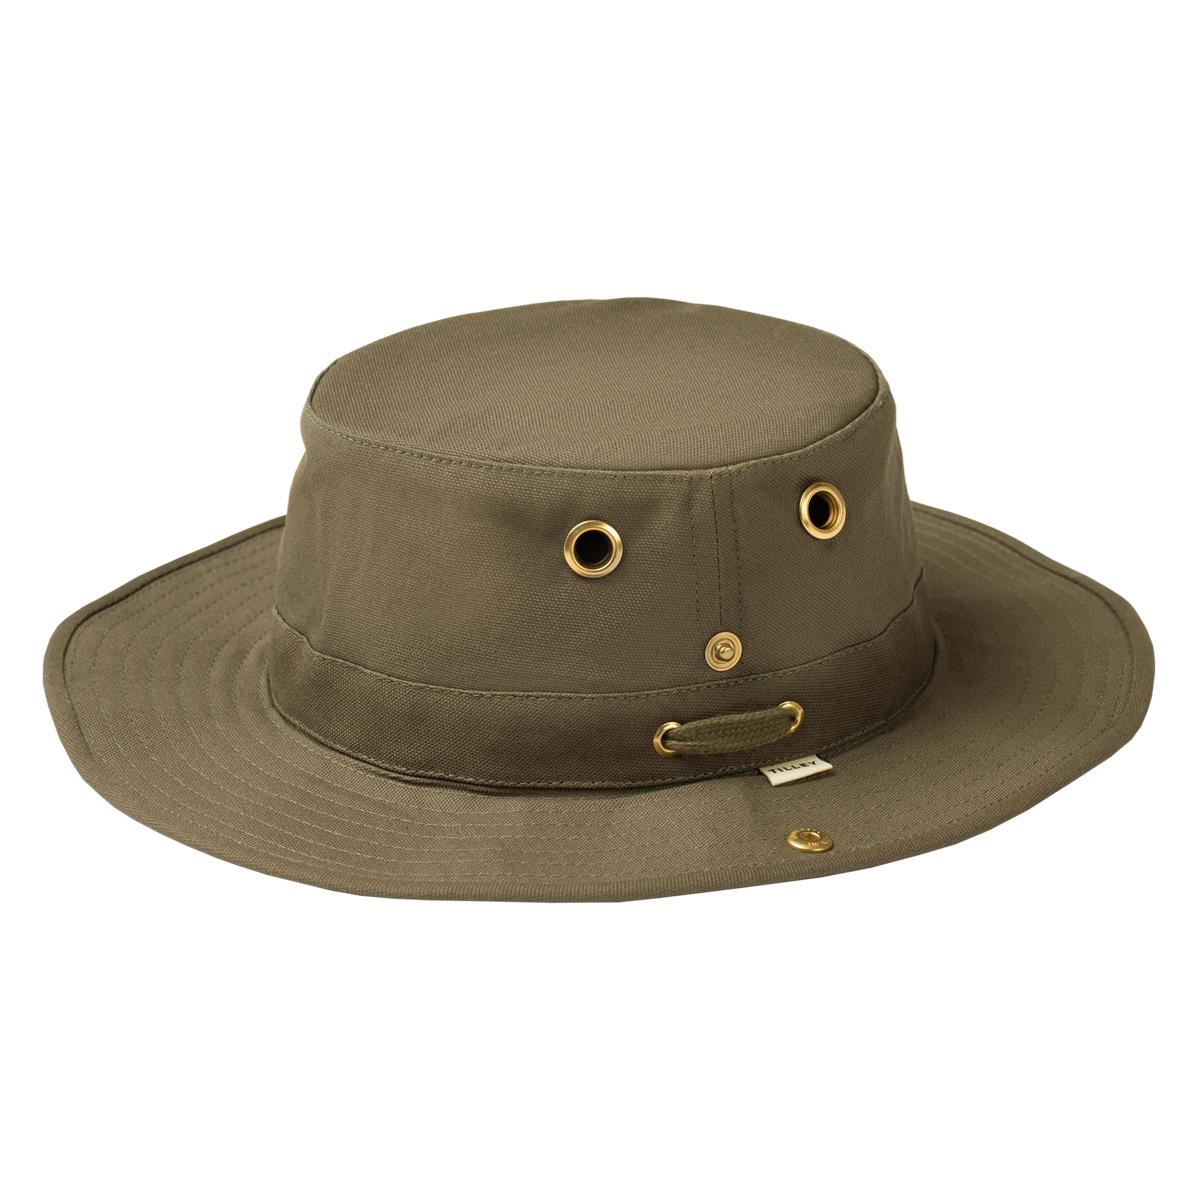 What are the traits of the Tilley hemp hat?